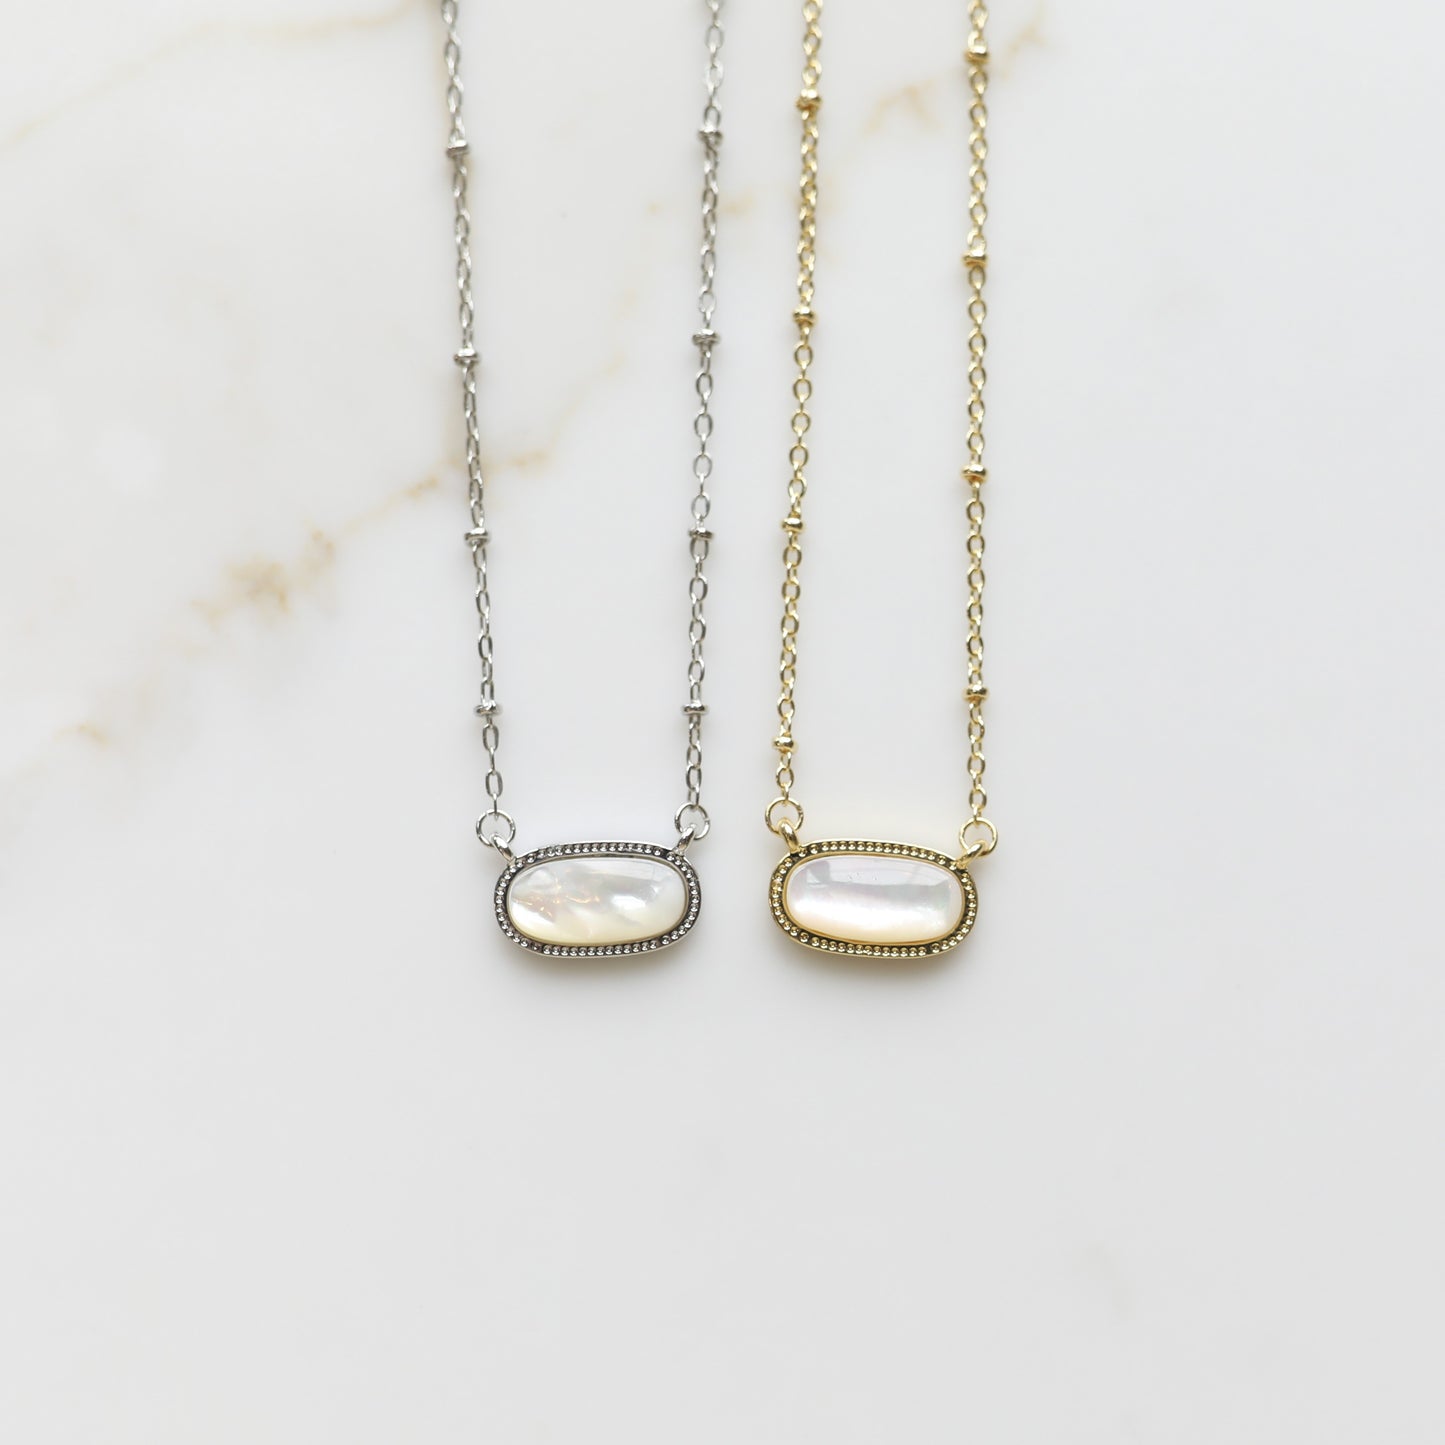 Meaningful Gemstone Necklace in Mother of Pearl White available with a Gold or Silver chain